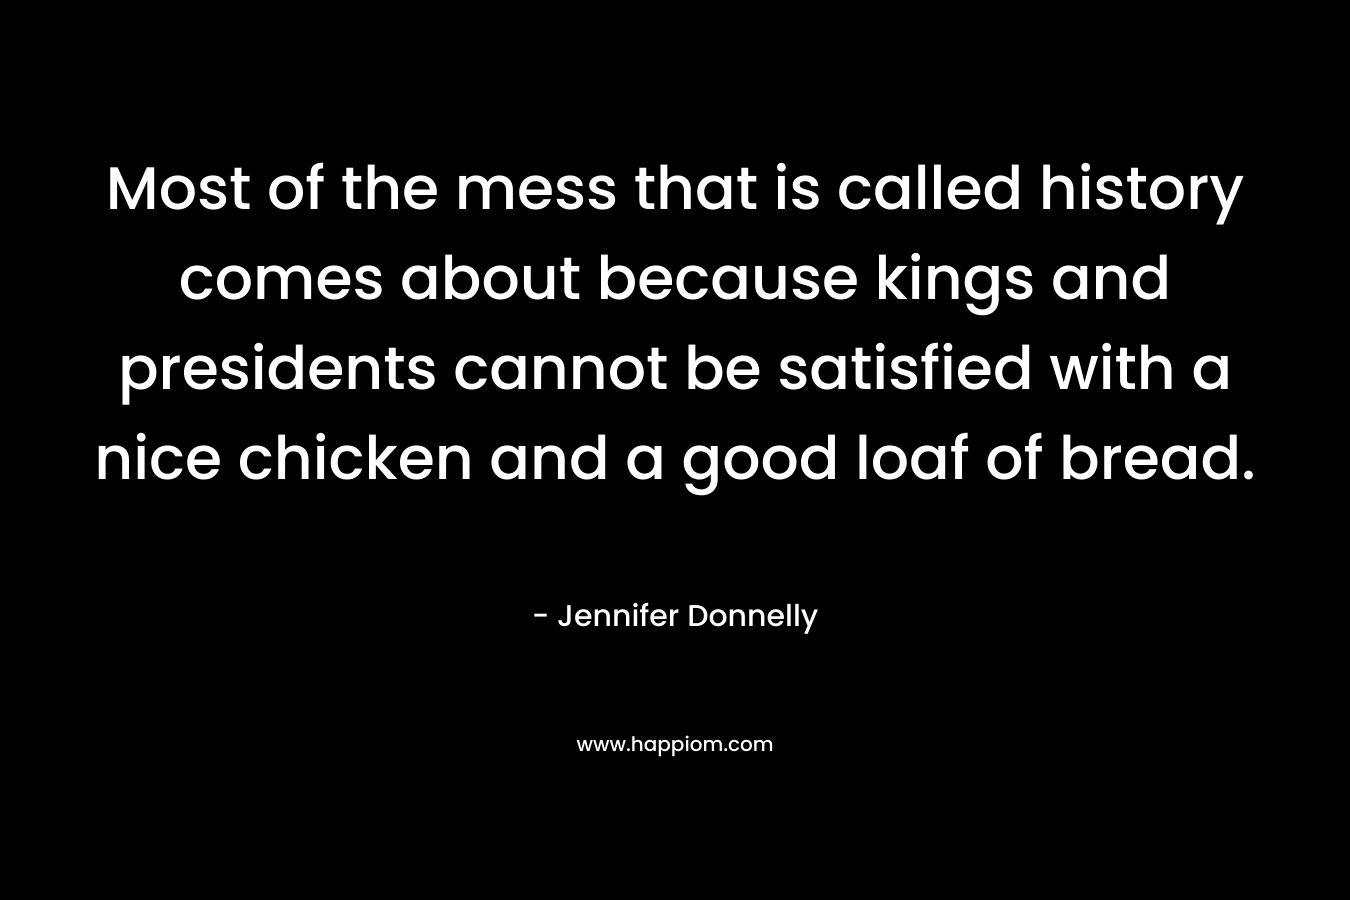 Most of the mess that is called history comes about because kings and presidents cannot be satisfied with a nice chicken and a good loaf of bread. – Jennifer Donnelly